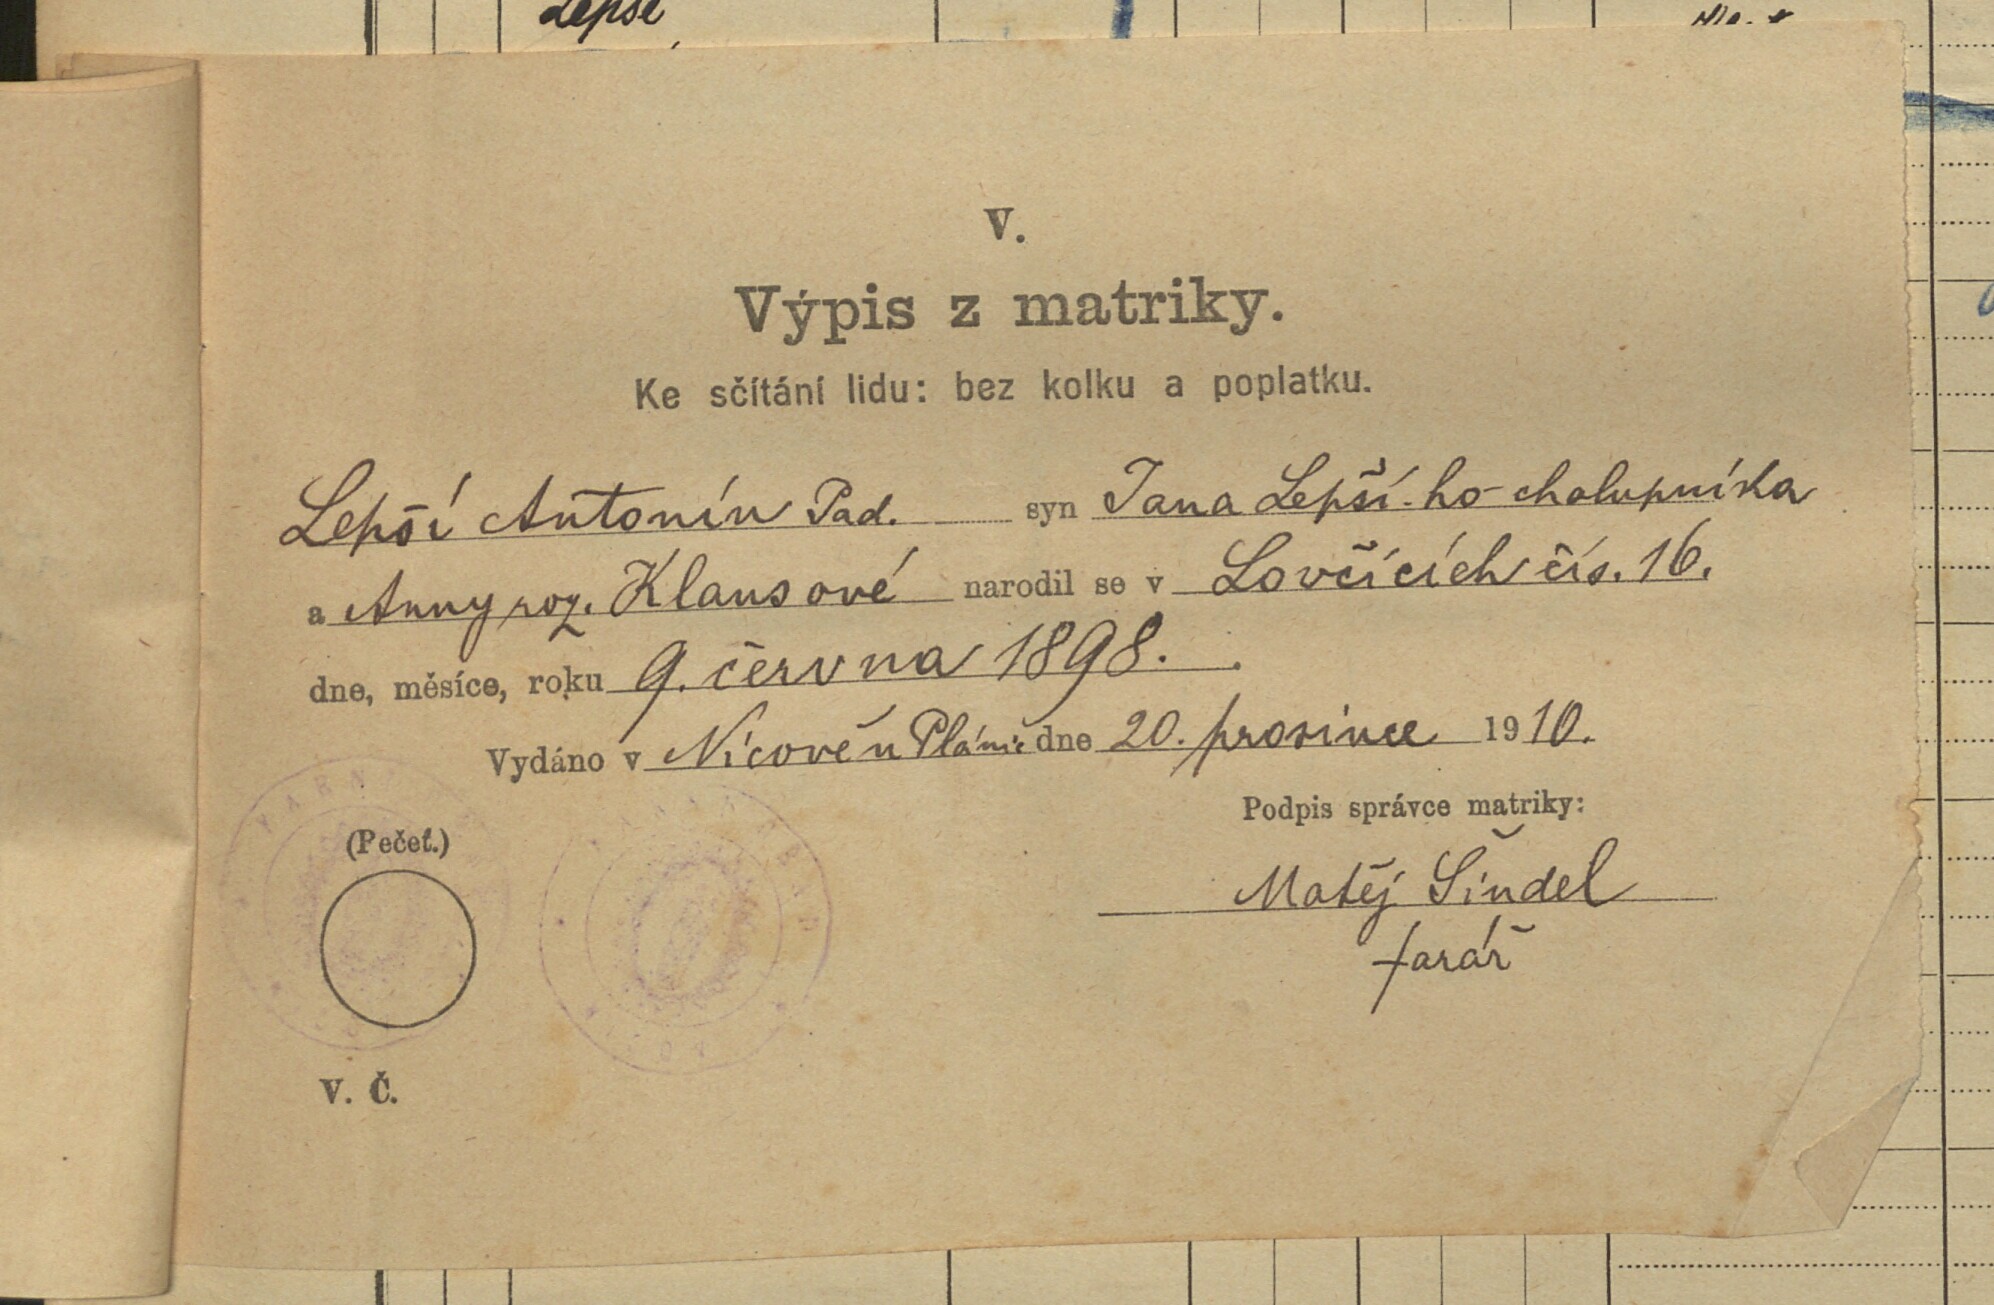 6. soap-kt_01159_census-1910-kvasetice-lovcice-cp016_0060